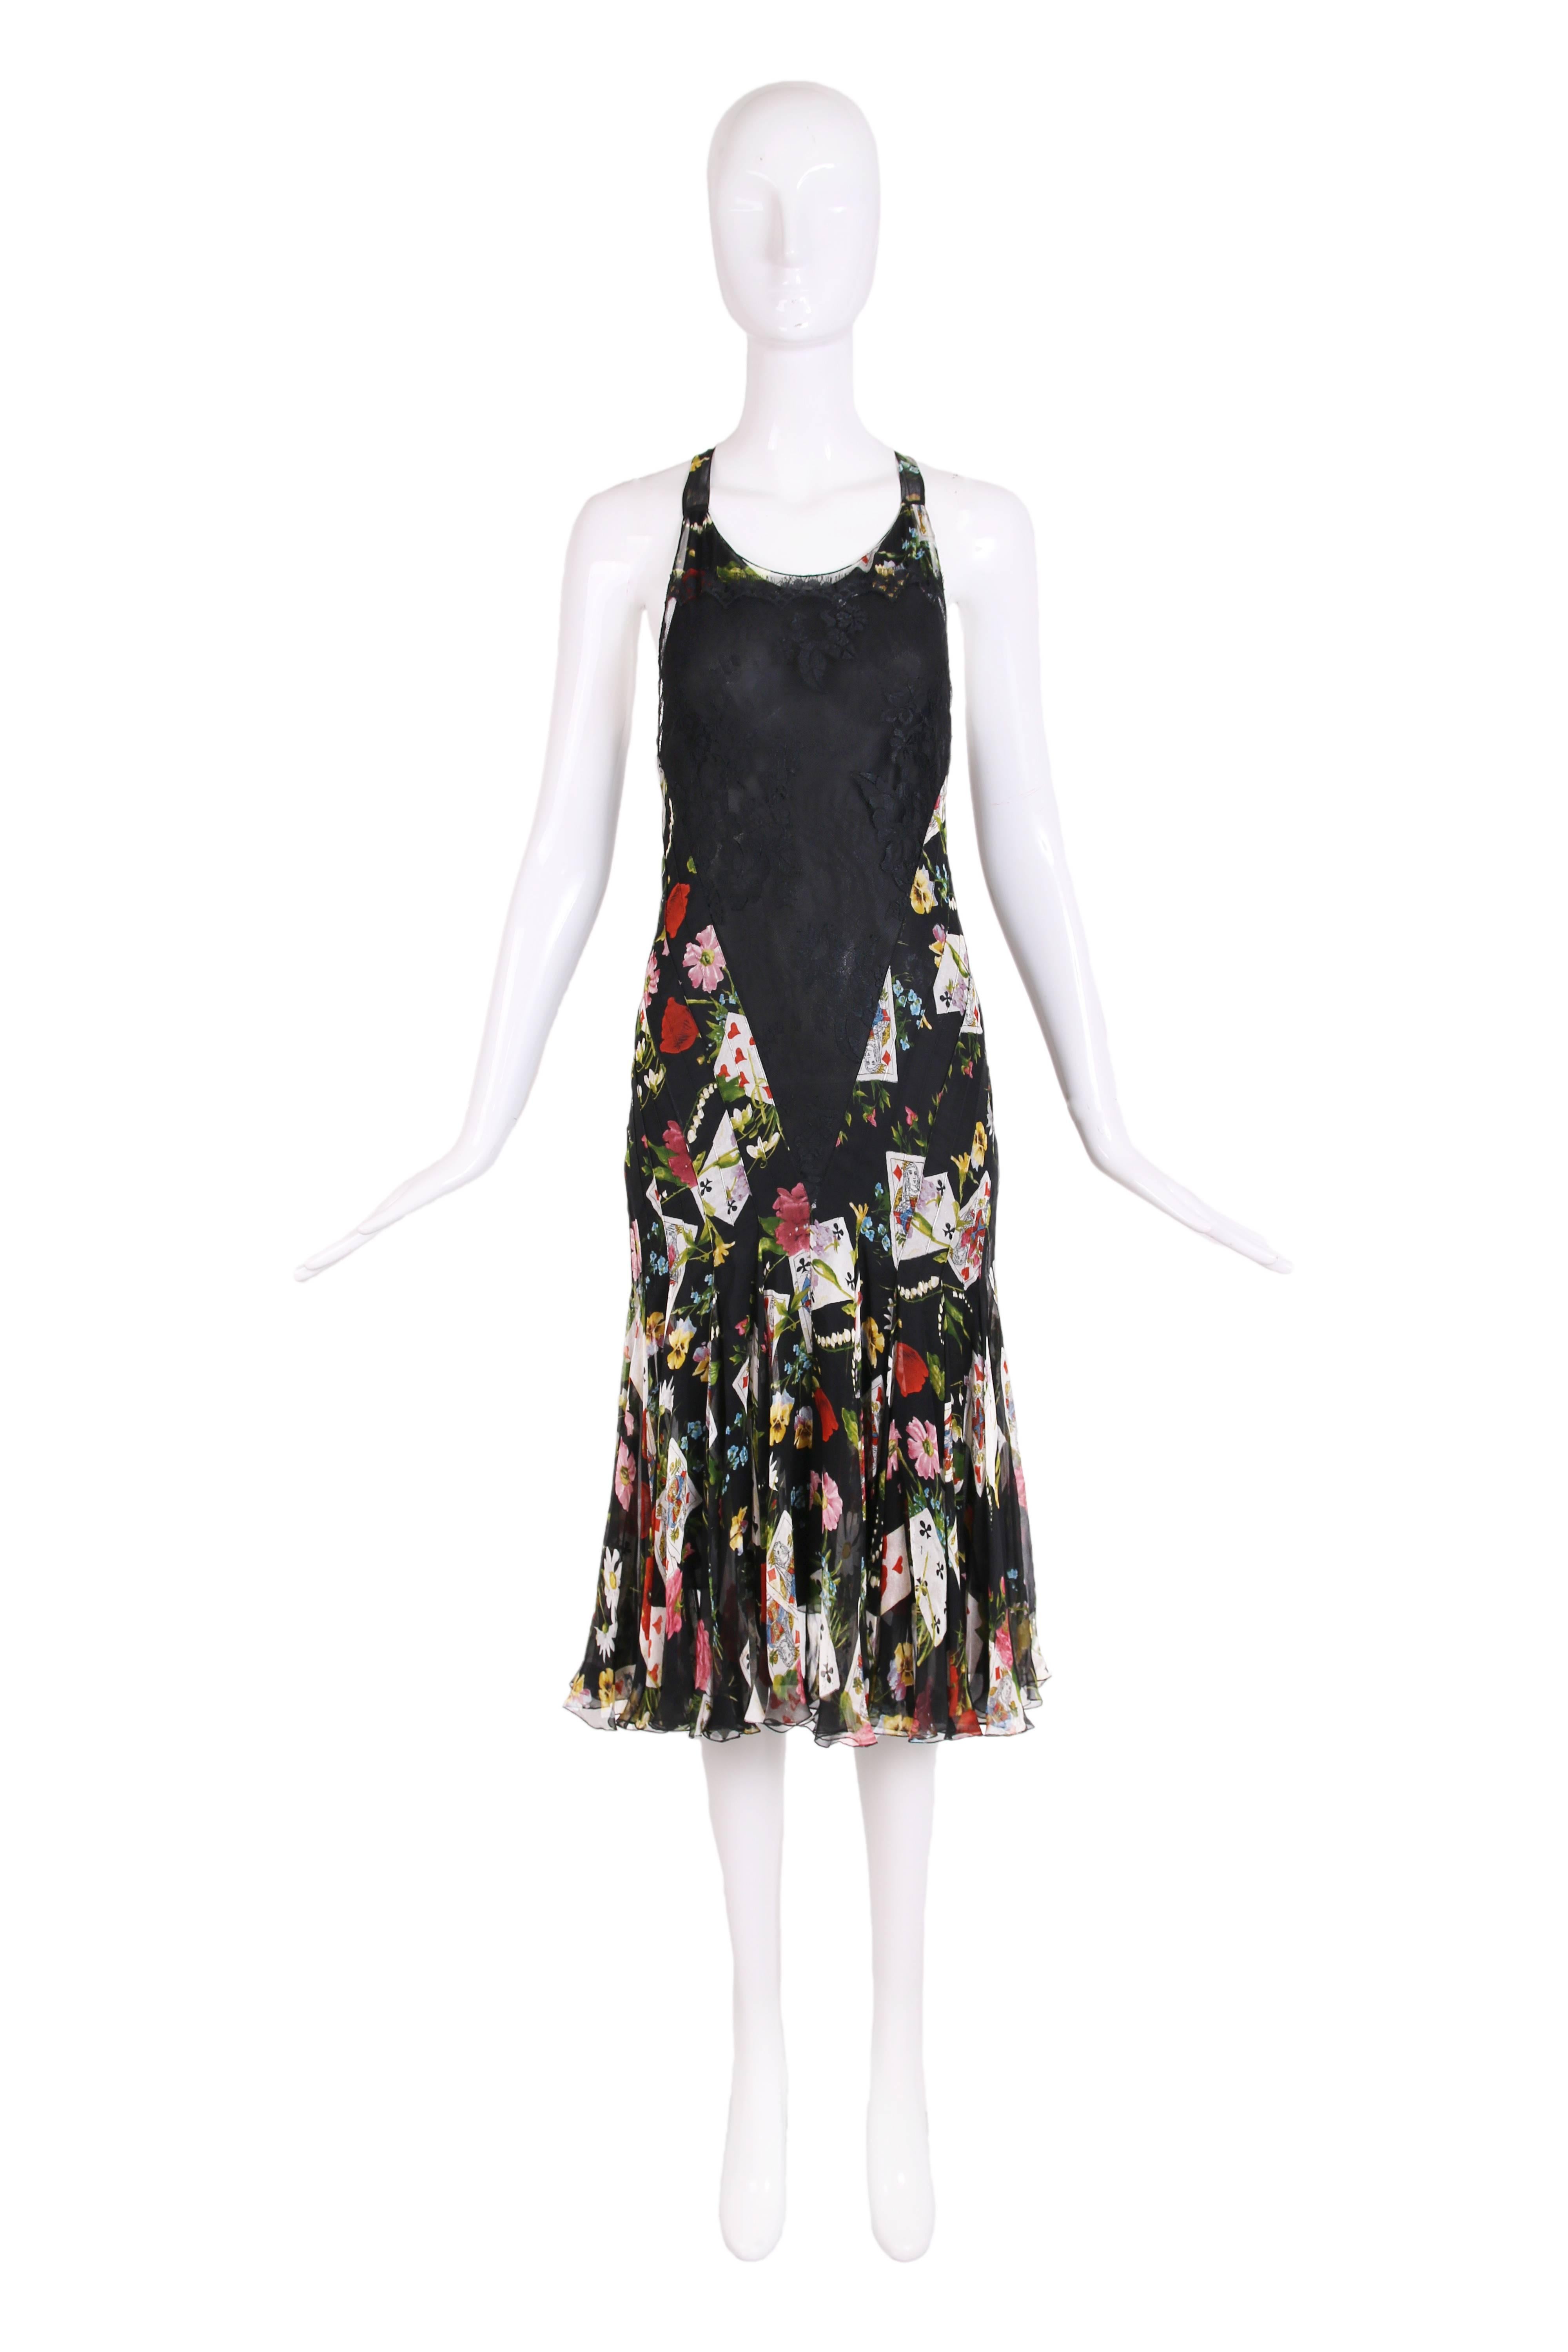 Christian Dior by John Galliano bias-cut chiffon and lace cocktail dress with playing card print. Bodice is made from black lace and skirt made of playing card and floral print flared skirt and 